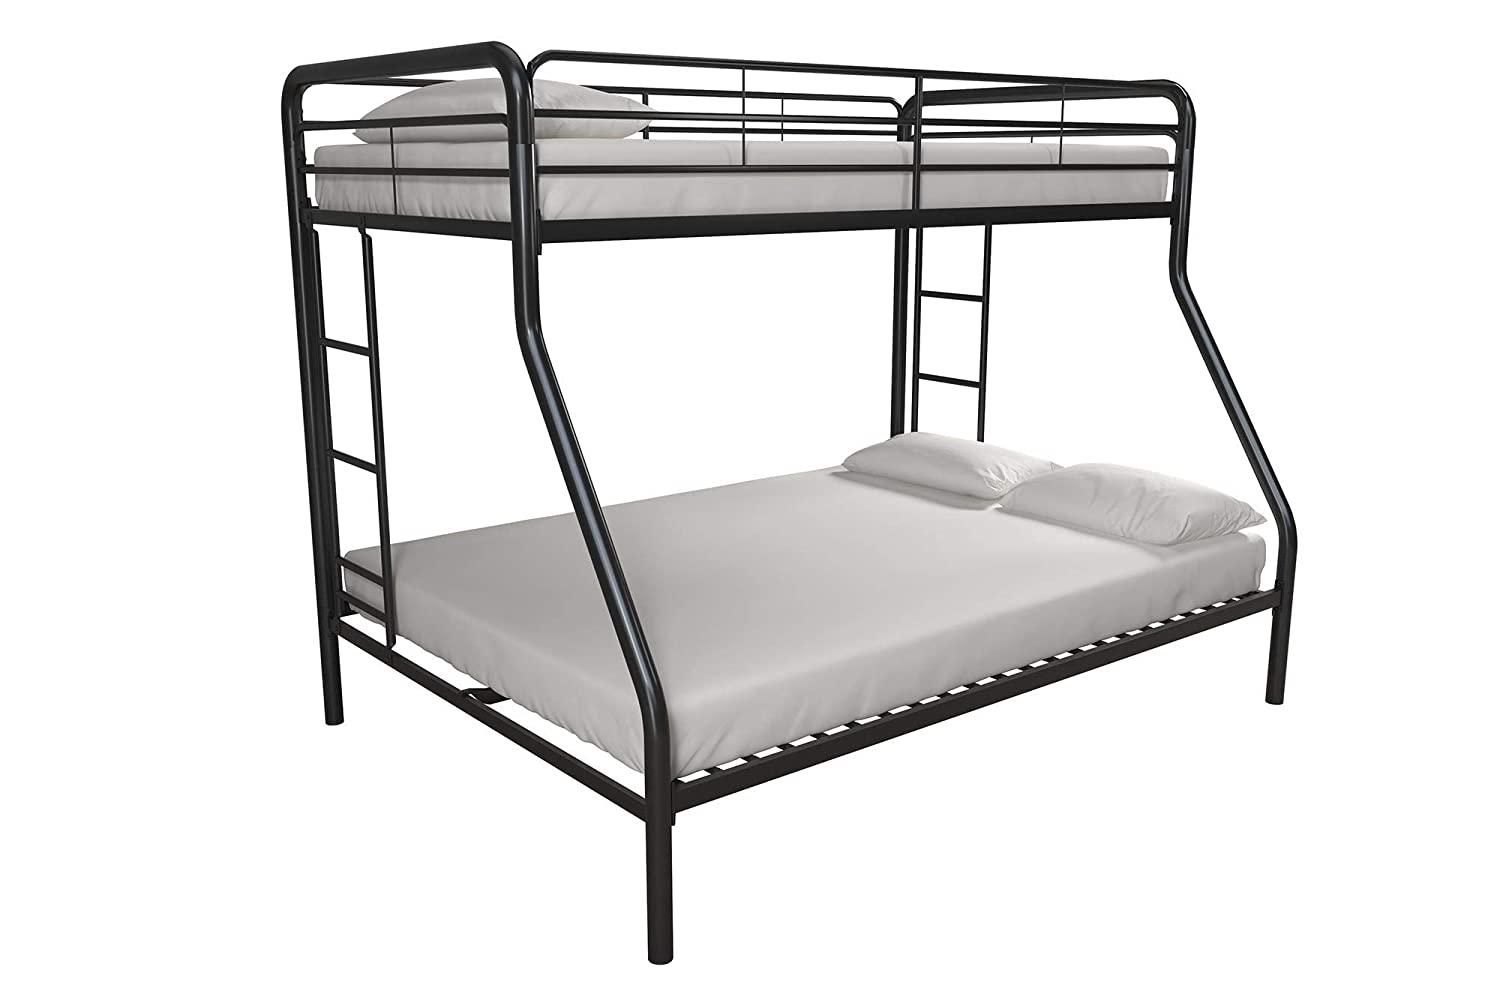 7 Best Kids Bunk Beds Under $200 2023 - Buying Guide 5